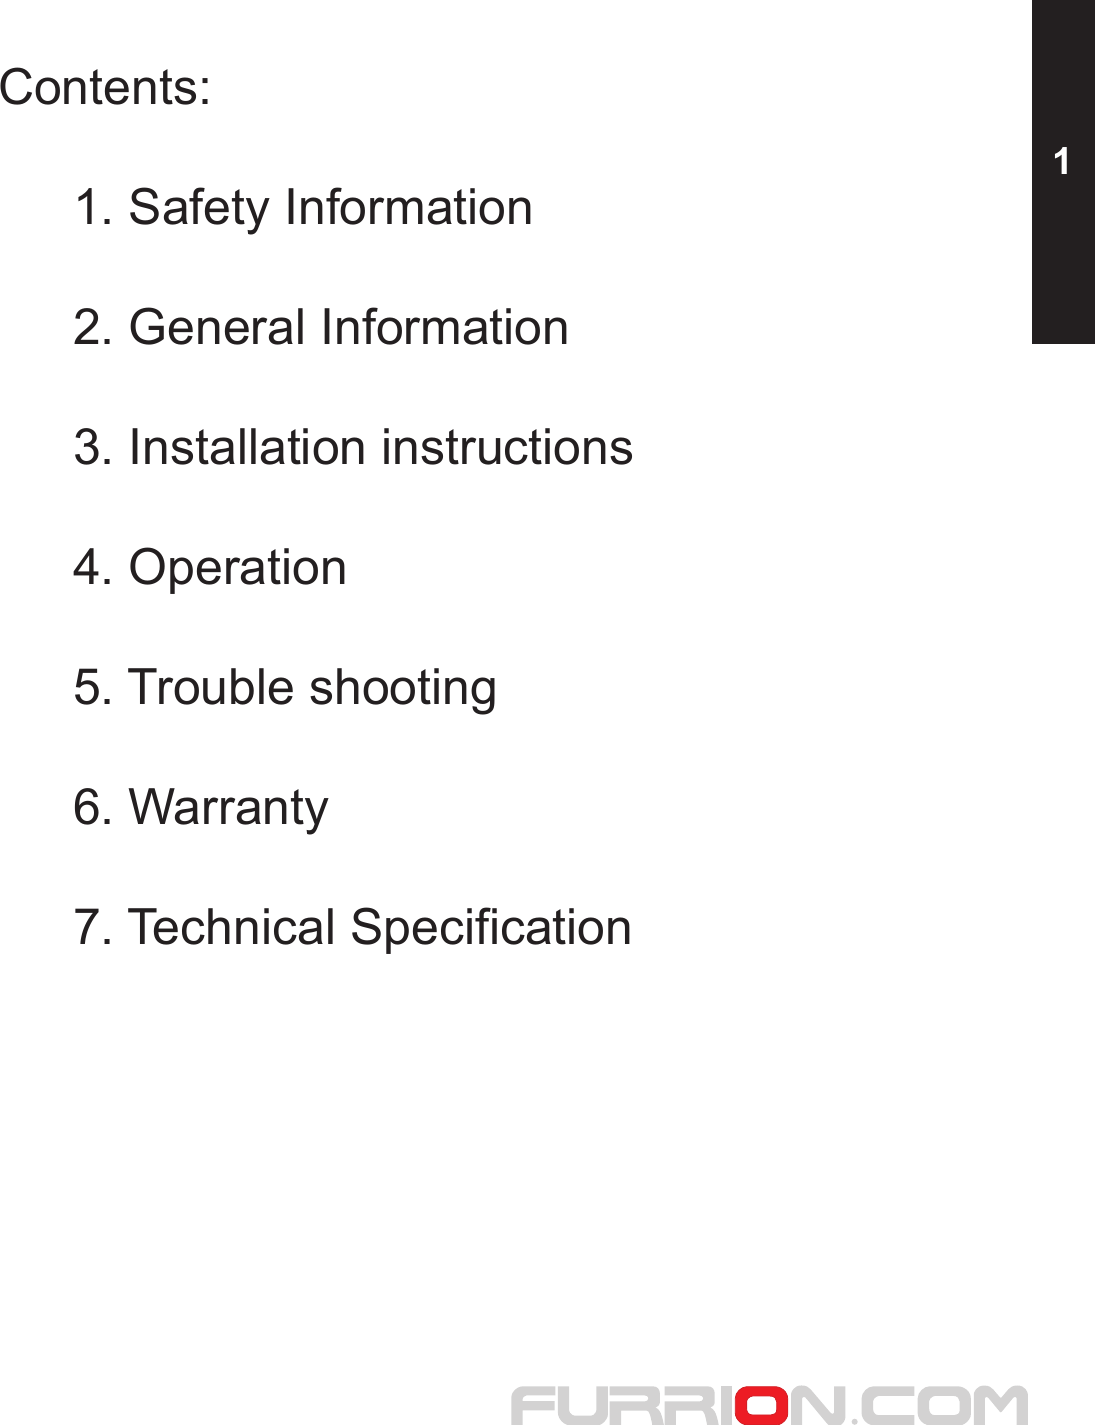 Contents:  1. Safety Information  2. General Information  3. Installation instructions  4. Operation  5. Trouble shooting  6. Warranty  7. Technical Specification1